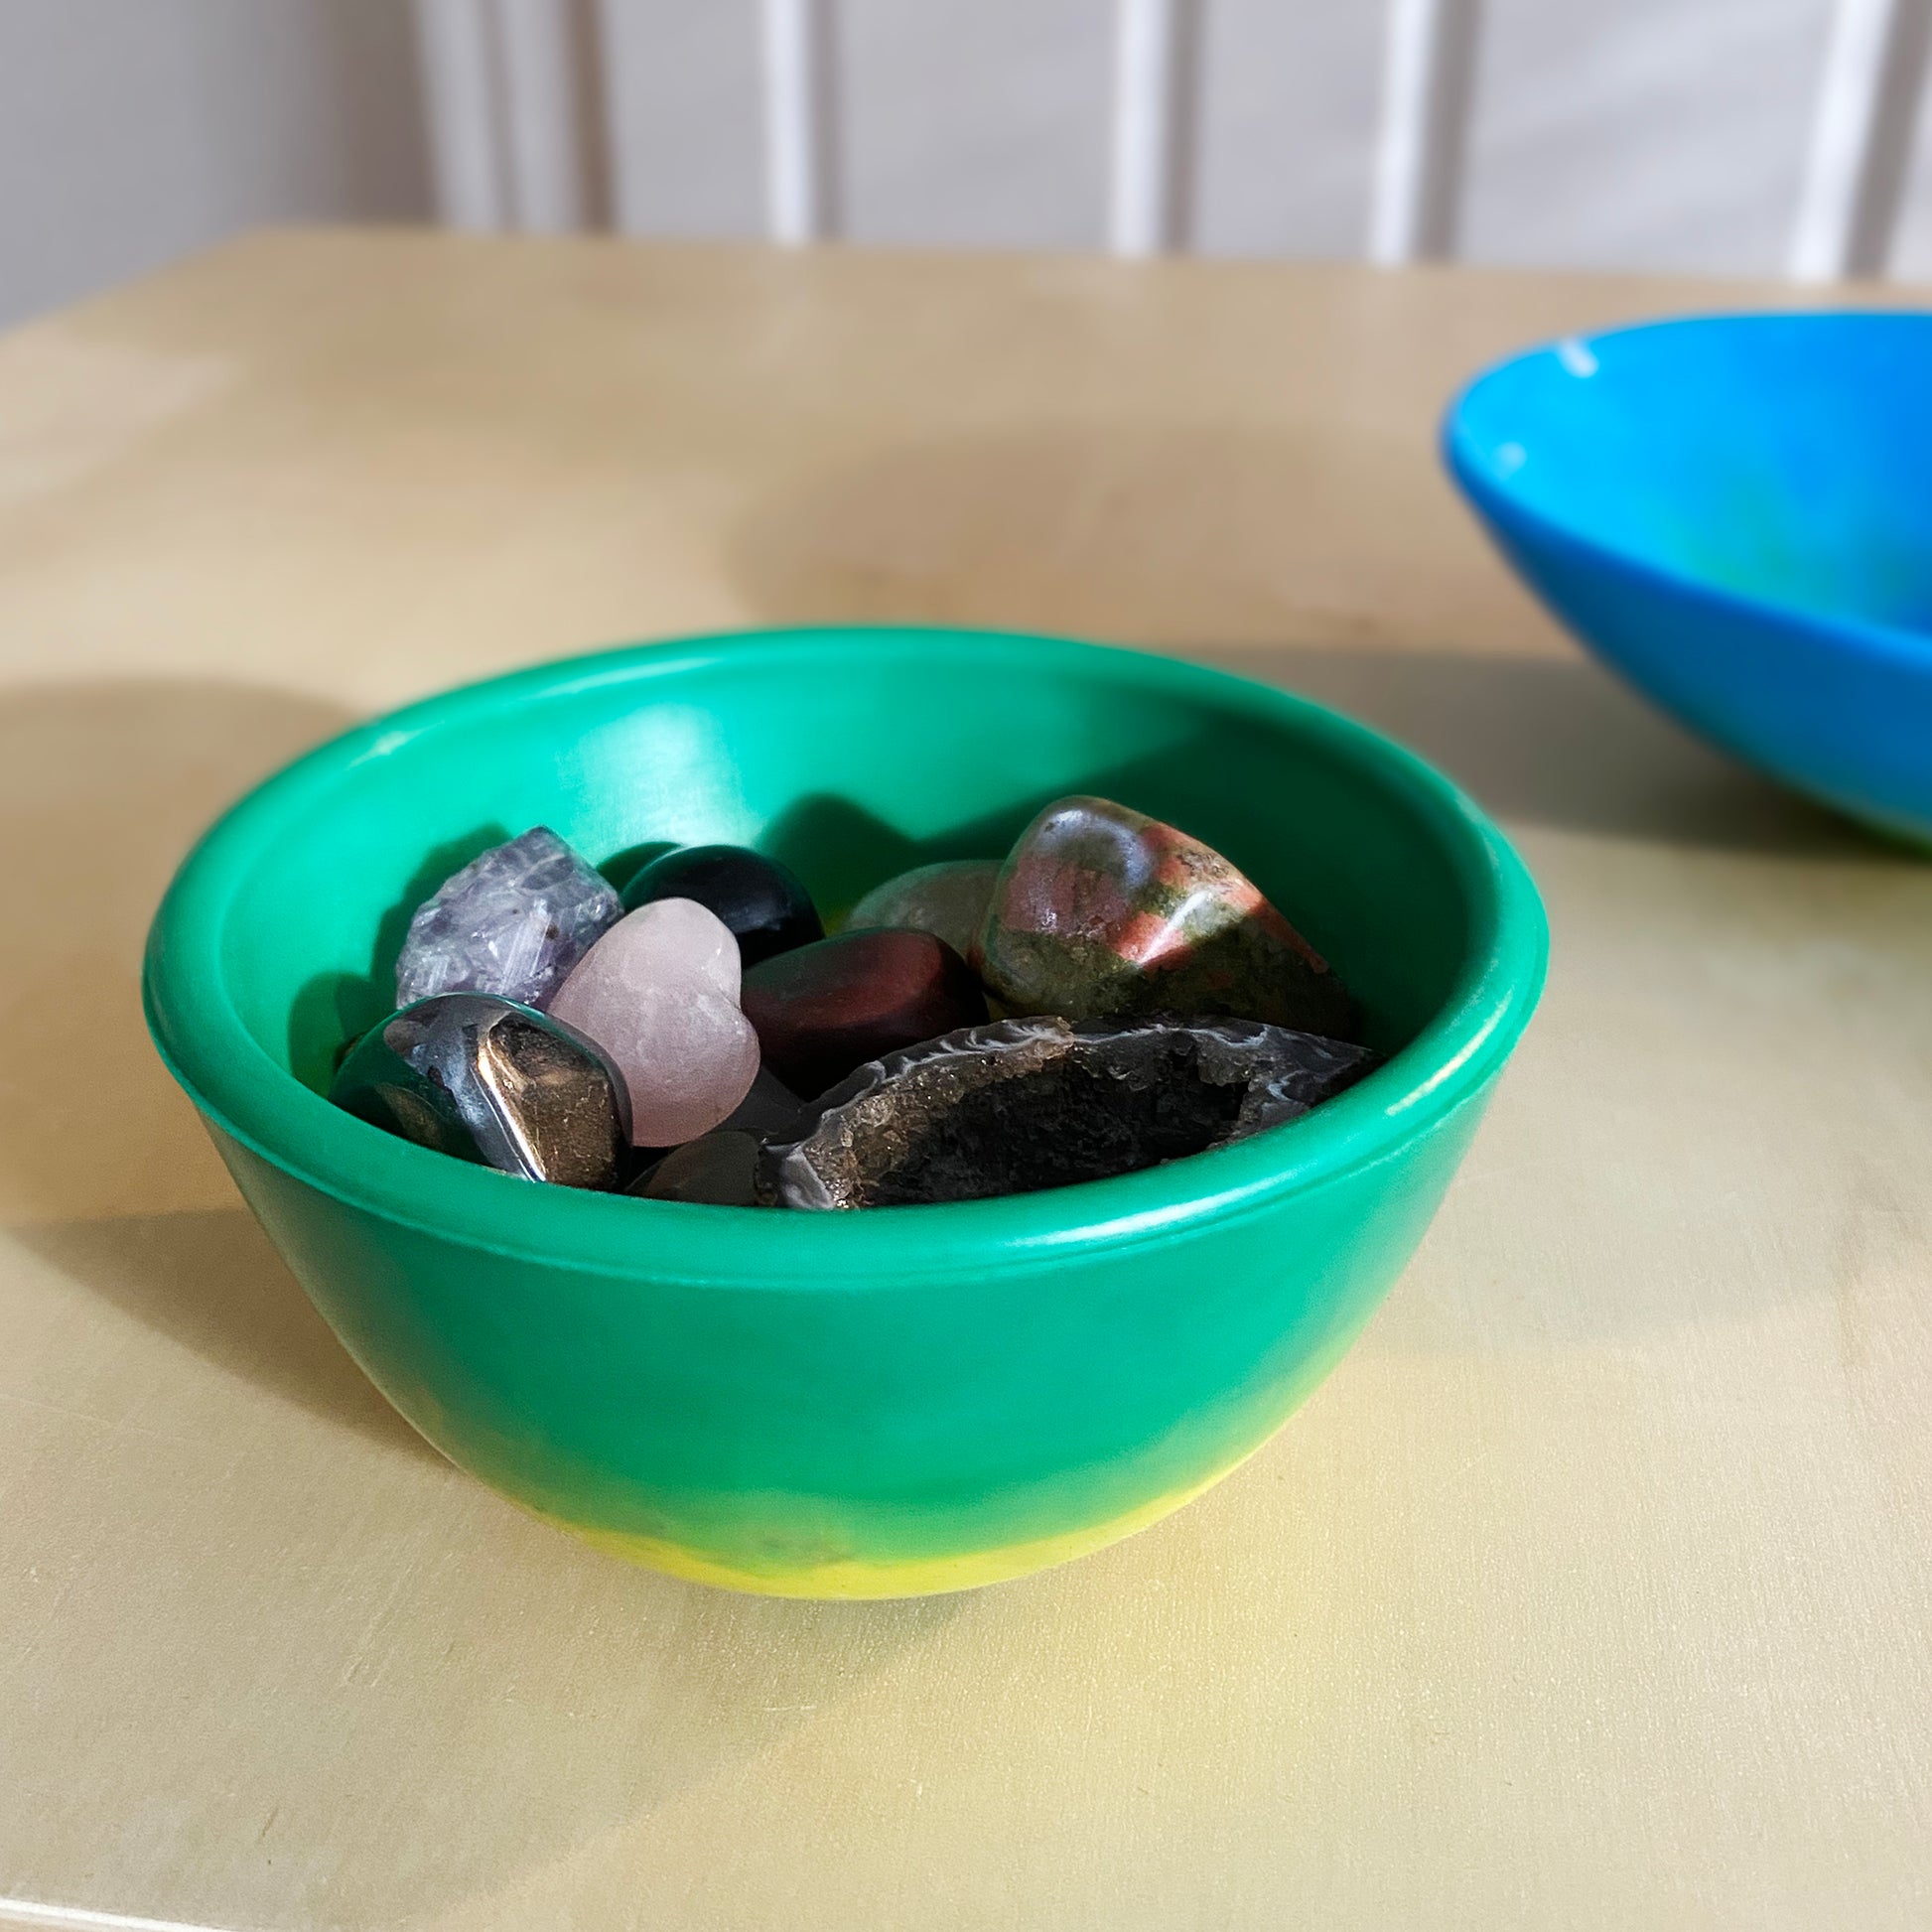 Precious plastic tools & equipment: DIY recycled bowls with this alloy mould